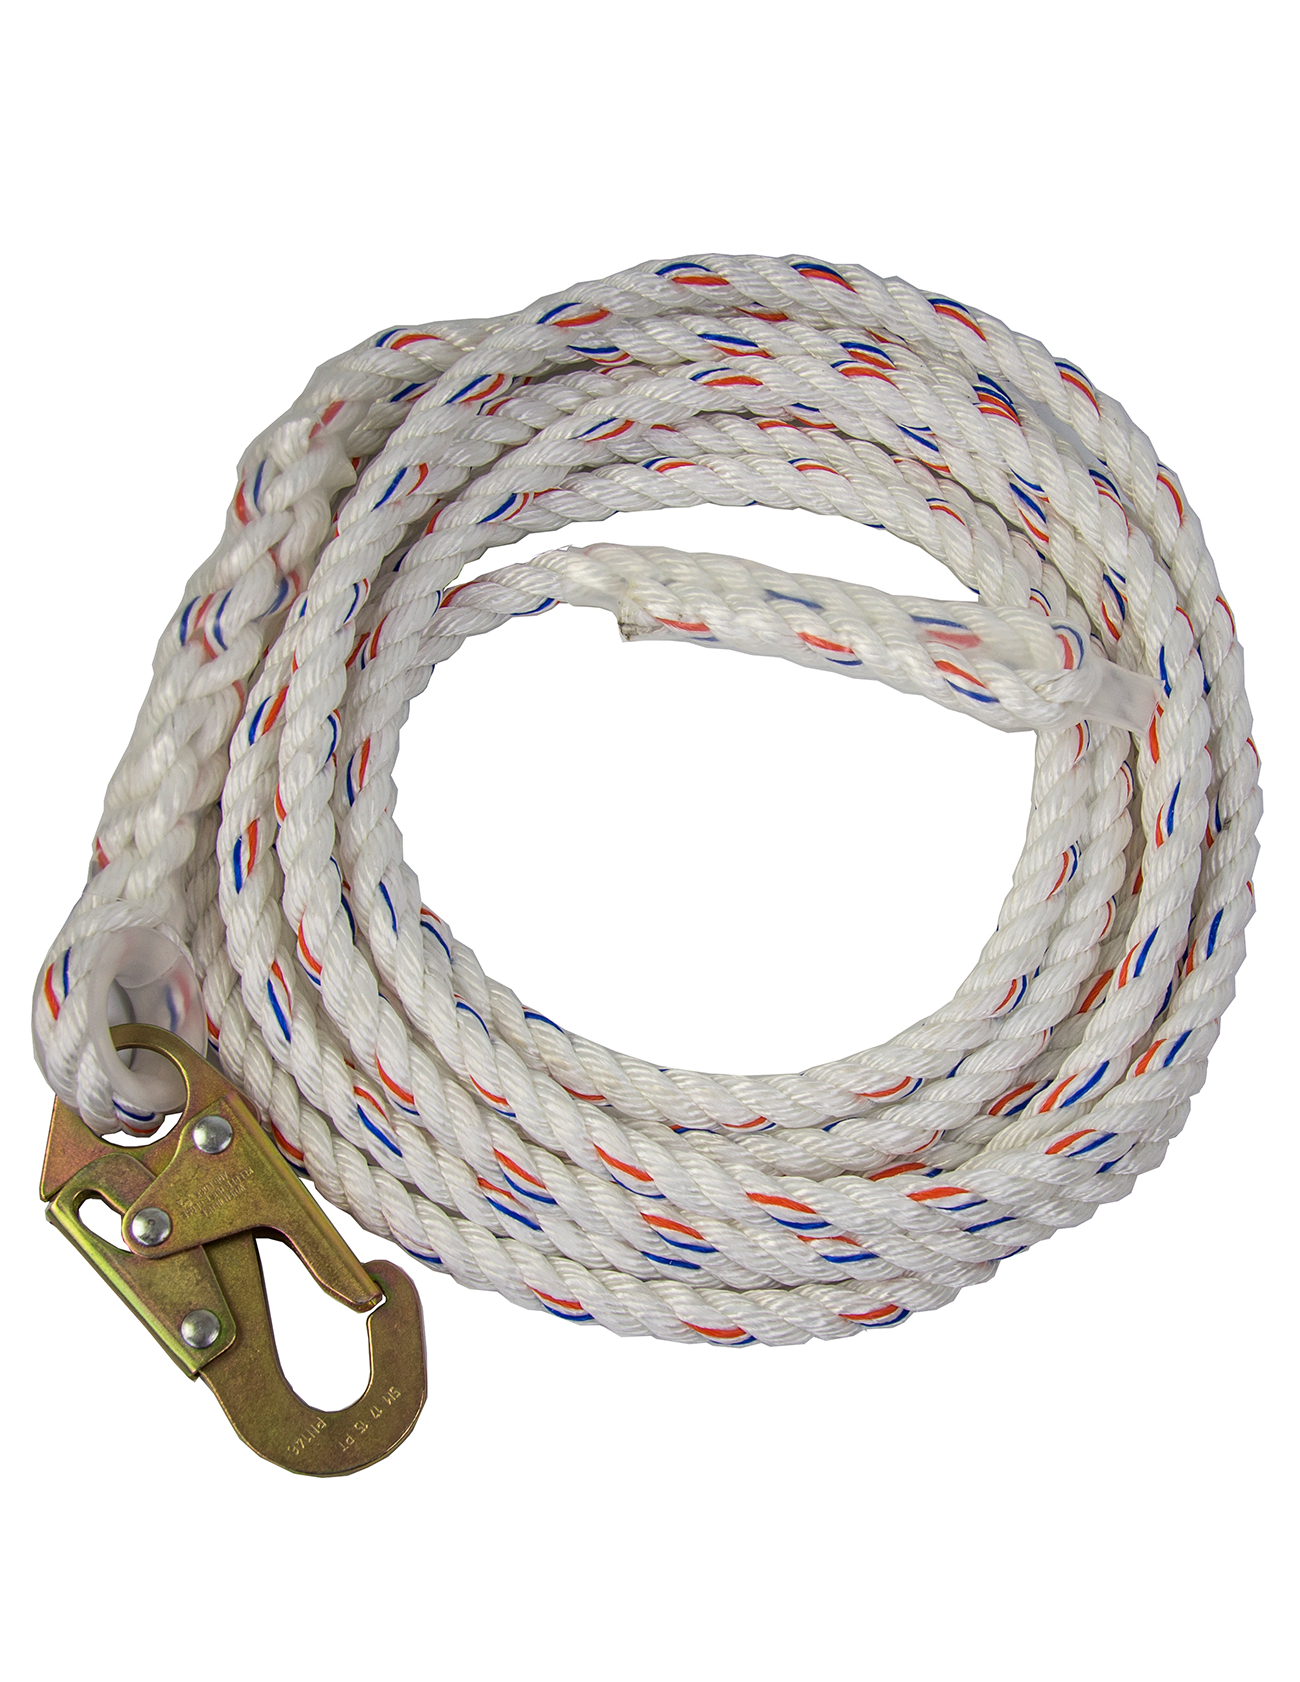 KStrong® 200 ft. Vertical White Polydac Rope Lifeline with Snap